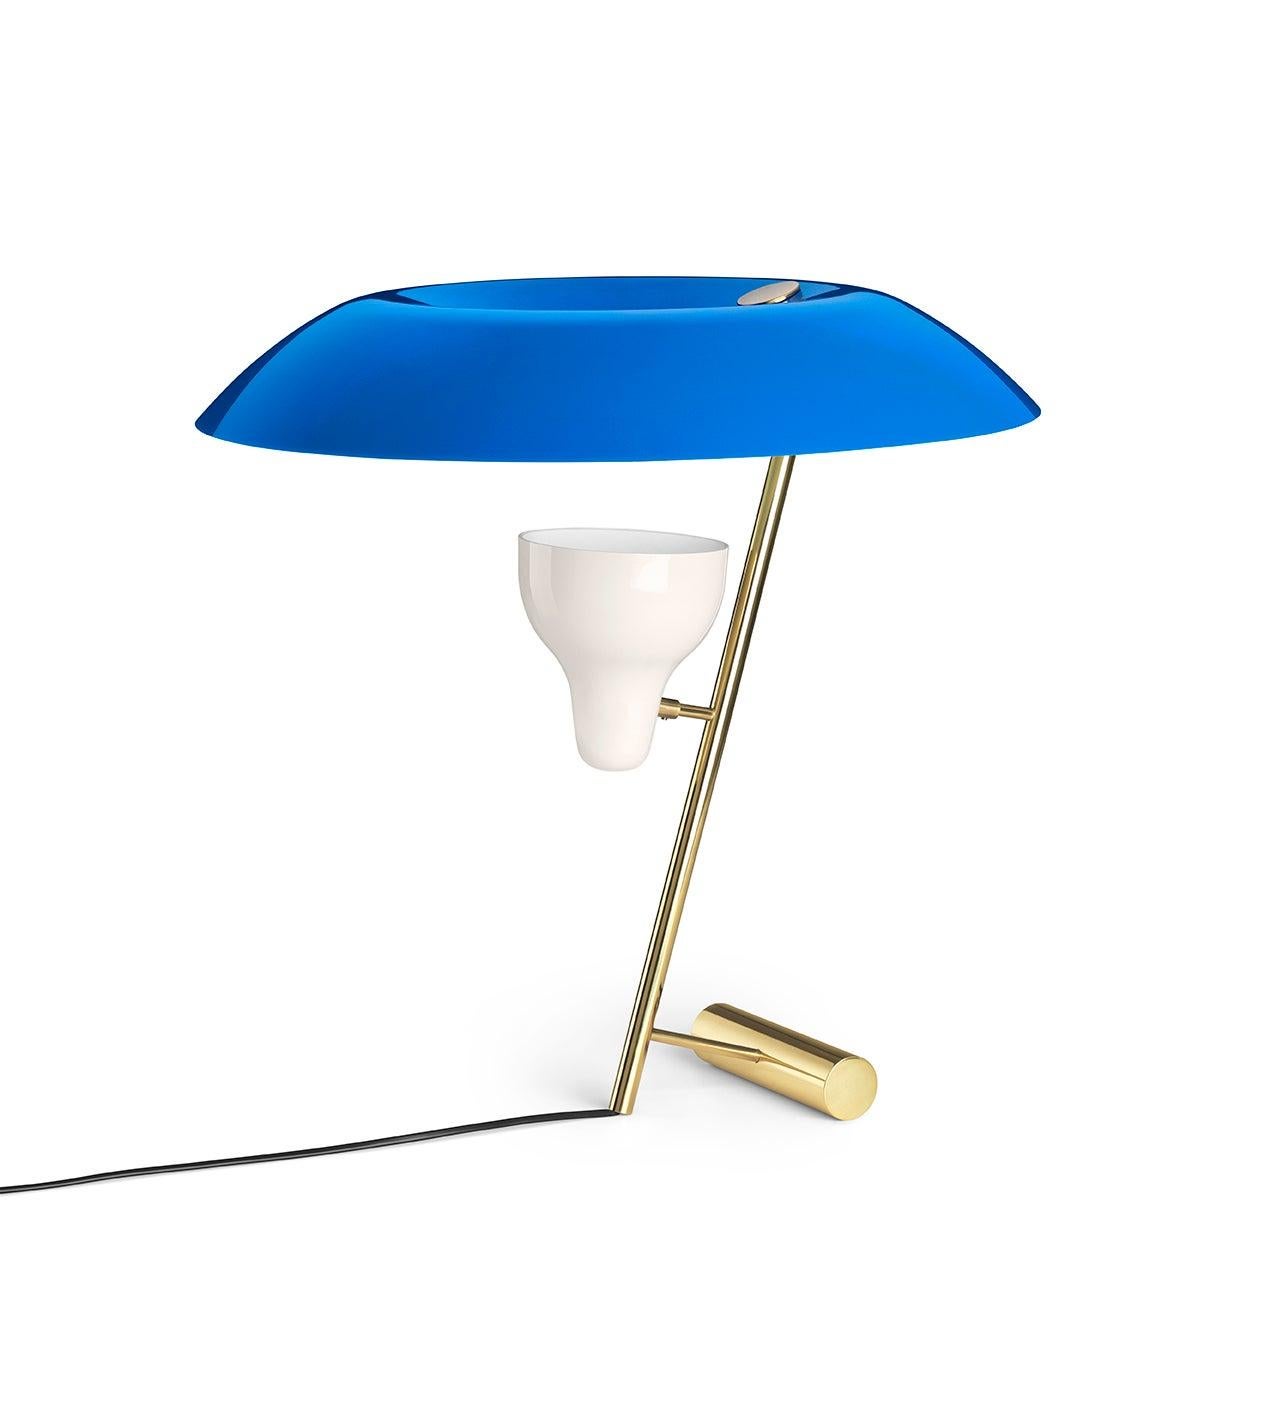 Metal Gino Sarfatti Lamp Model 548 Polished Brass with Blue Difuser by Astep For Sale